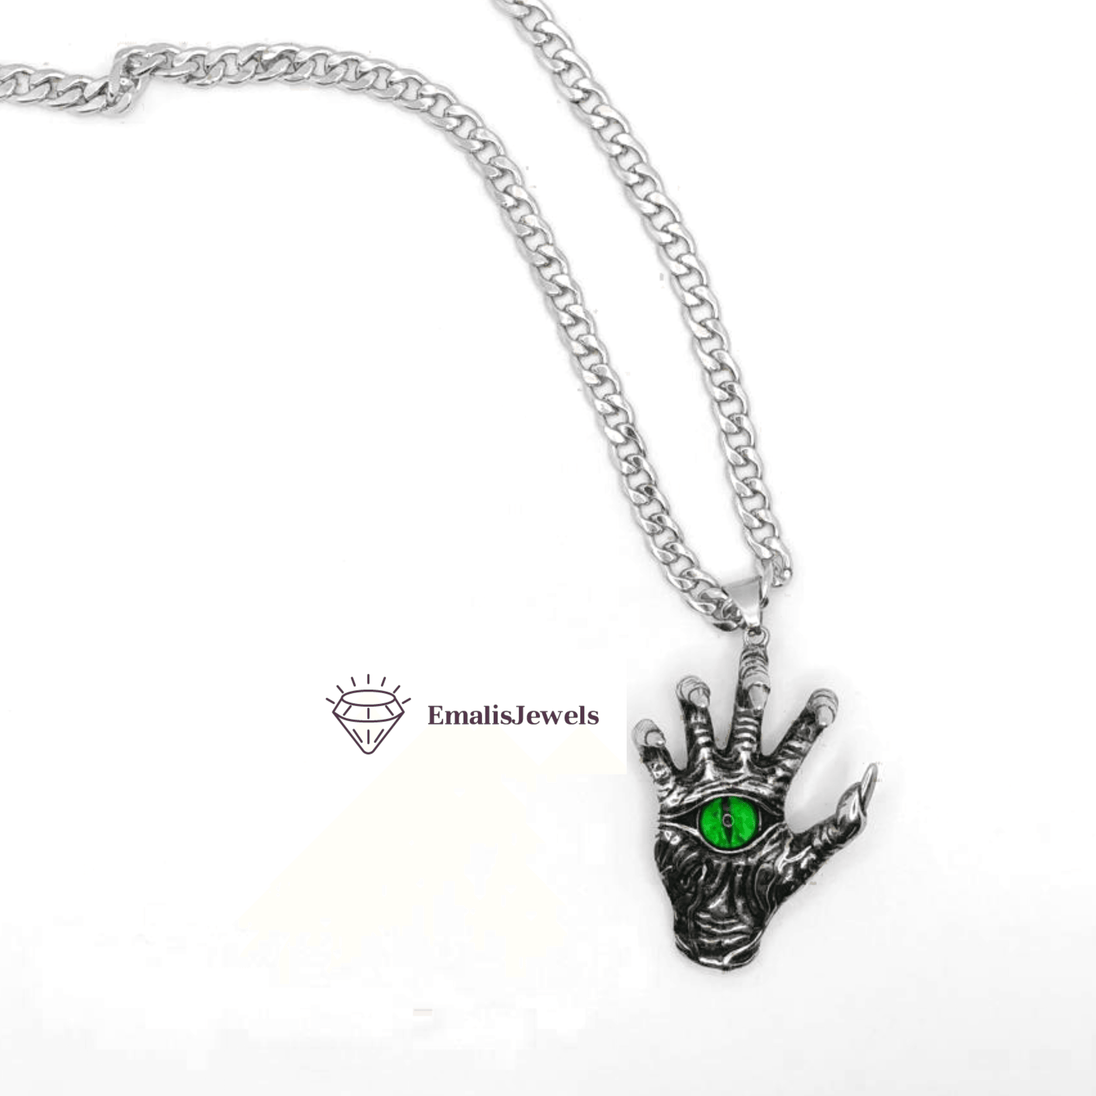 Stainless Steel Chain Necklace and Stainless Steel Hand/Green Eye Pendant - PremiumBrandGoods